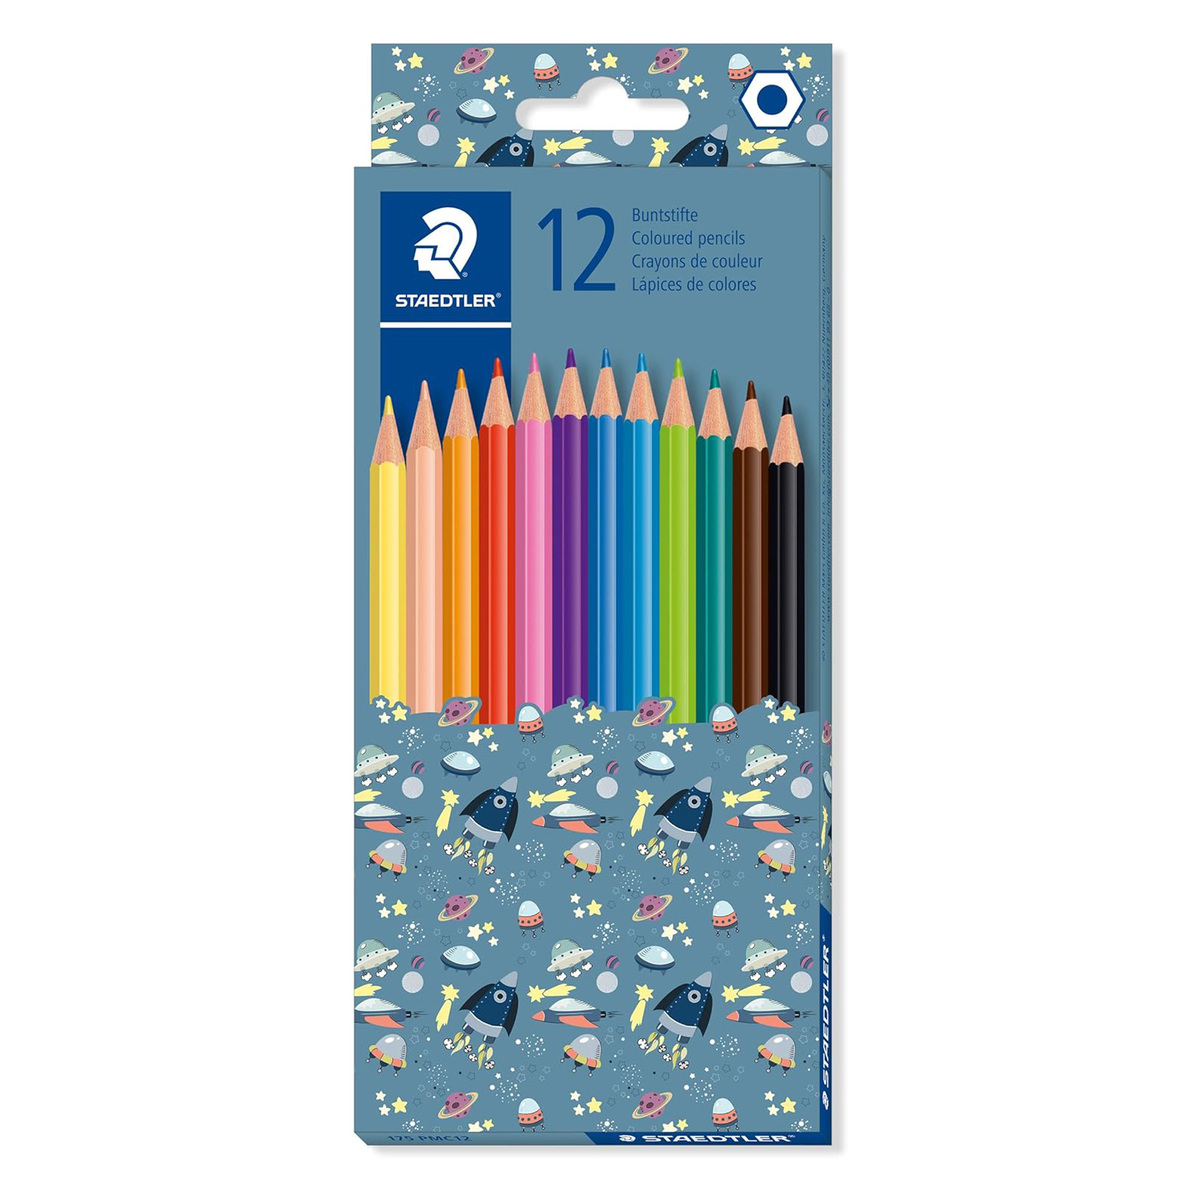 Staedtler Pattern Mix Coloured Pencil, 12 pcs, Assorted, ST-175-PMC12